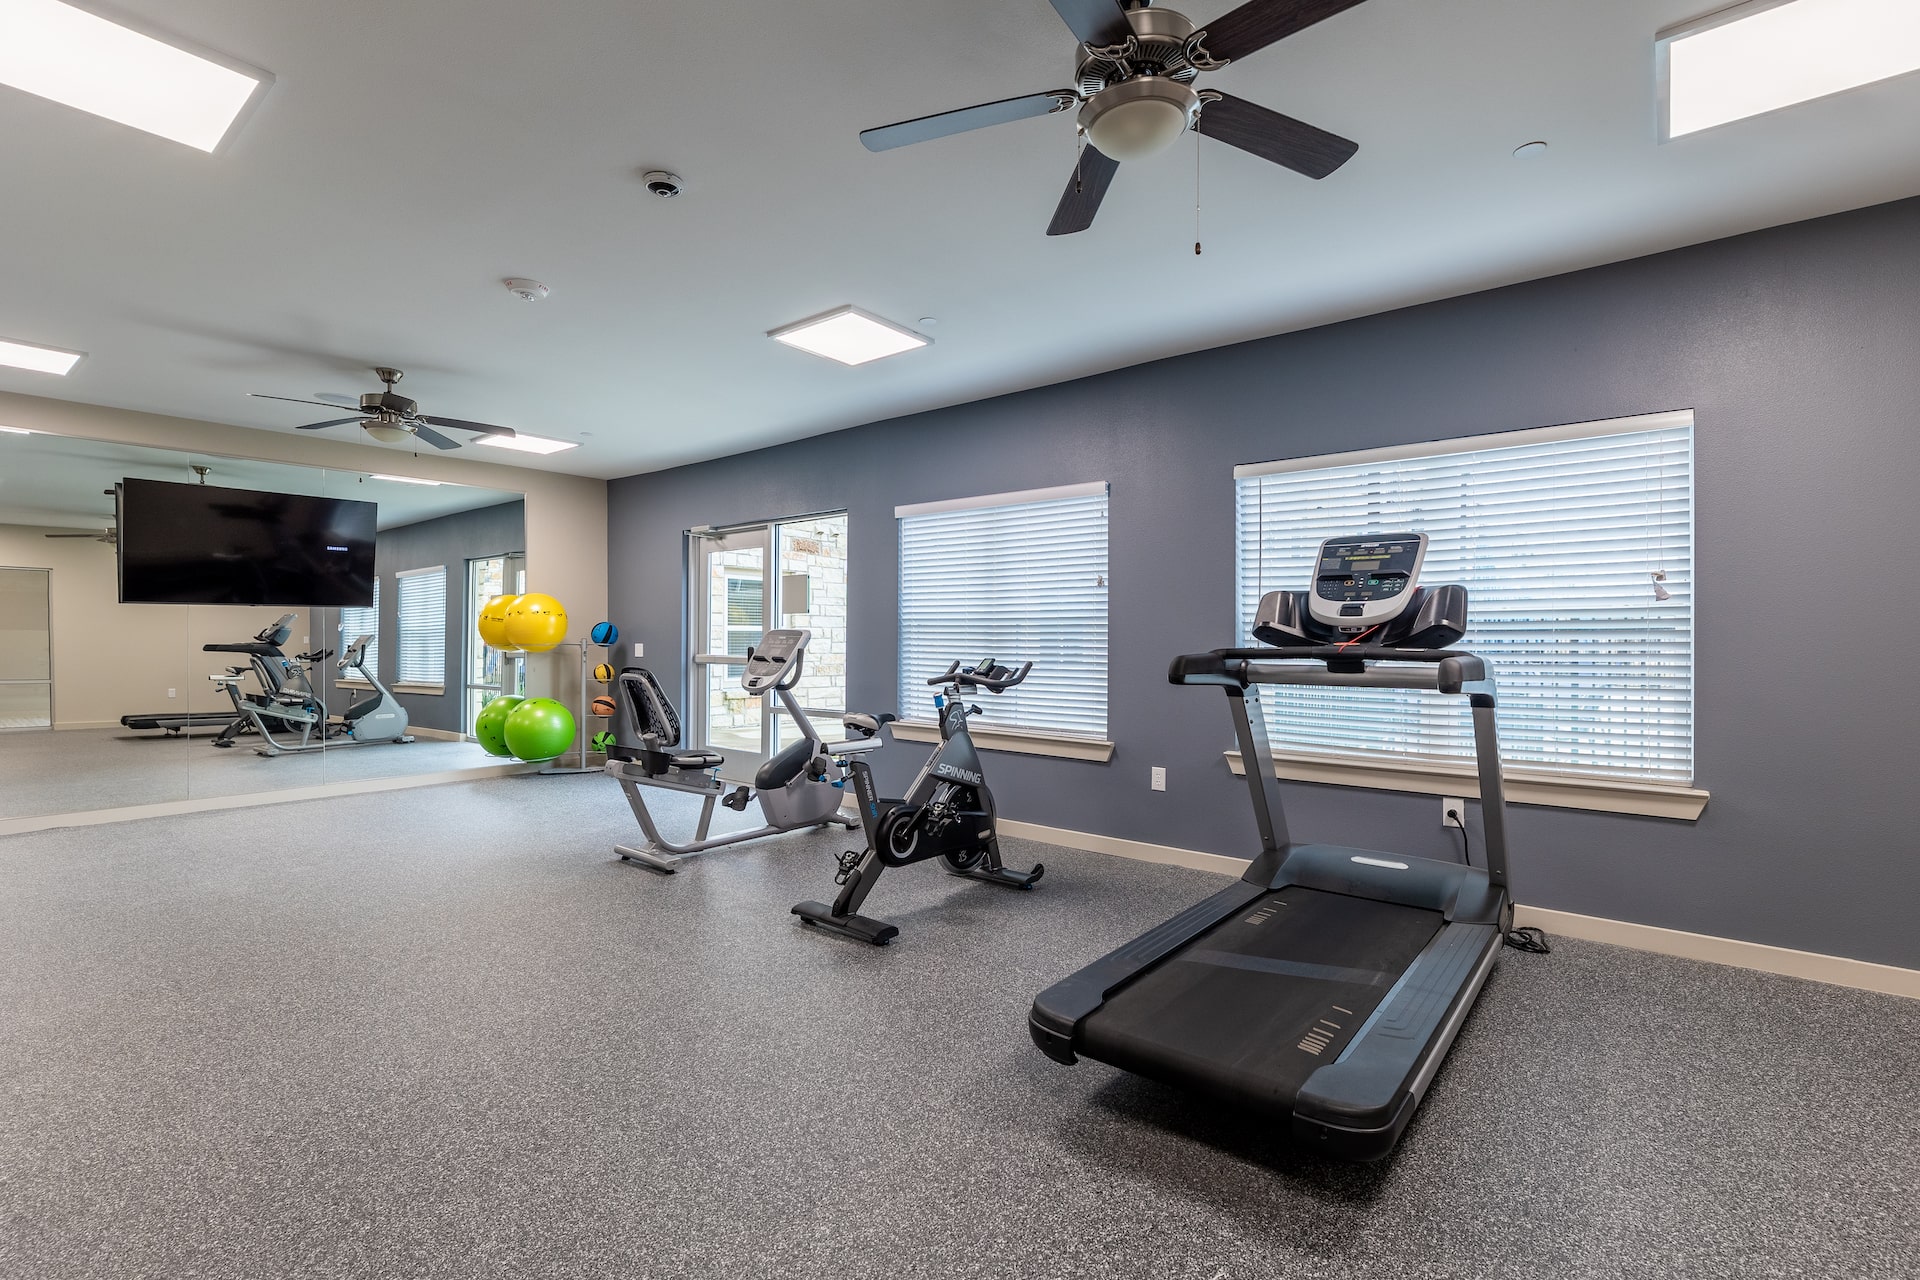 Cardio equipment in the state-of-the-art fitness center for residents of our Manor, TX apartments